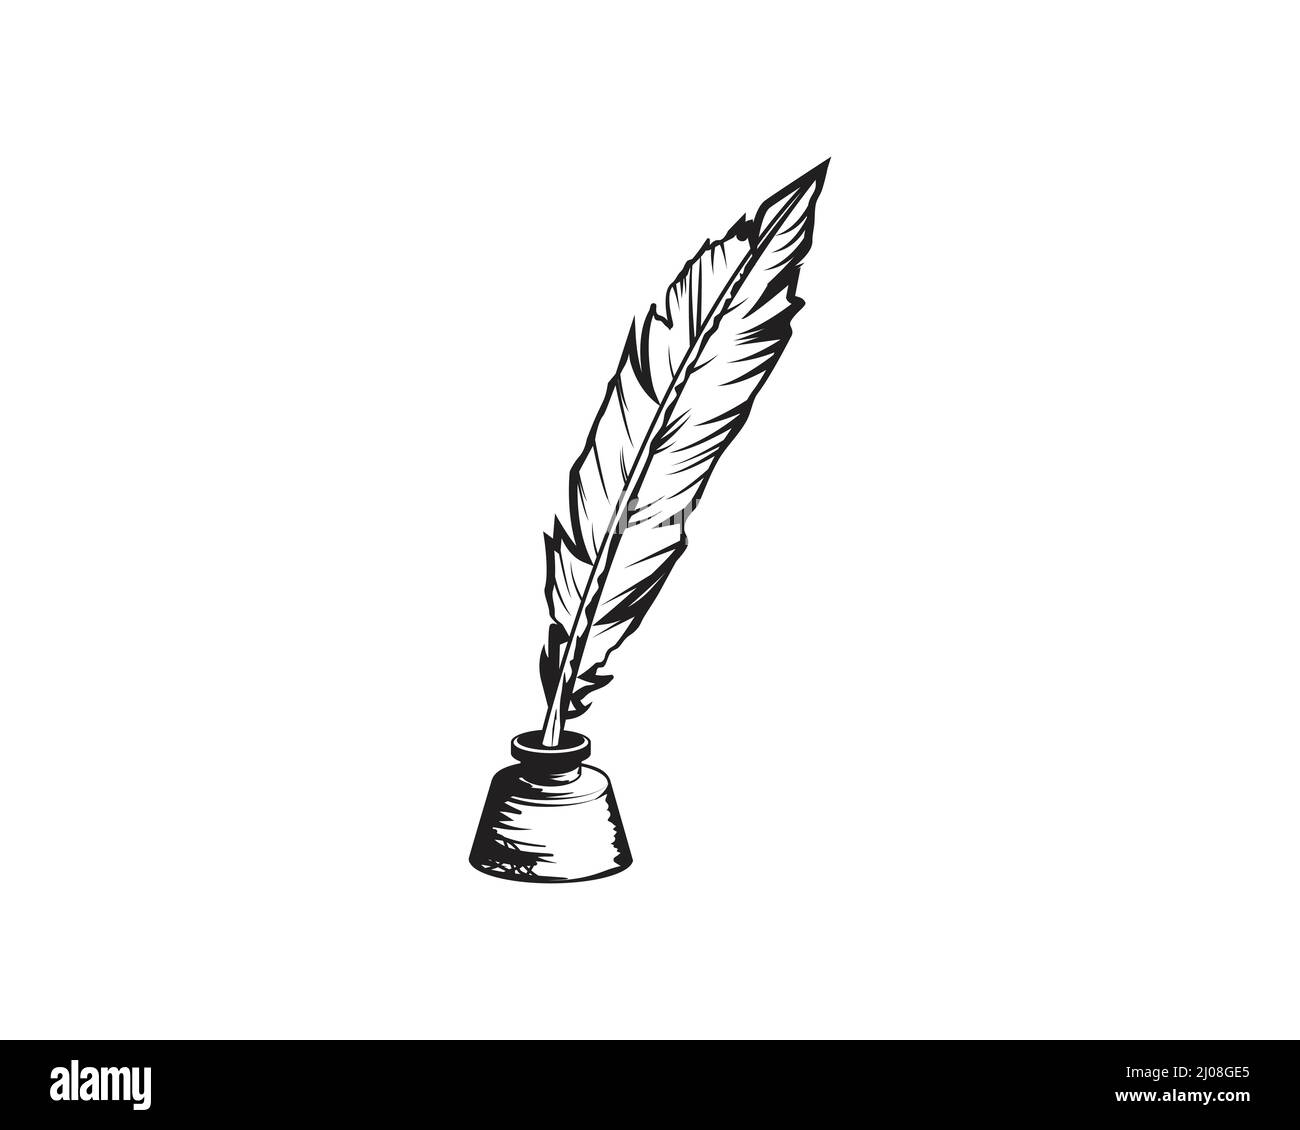 Quill ink Black and White Stock Photos & Images - Alamy